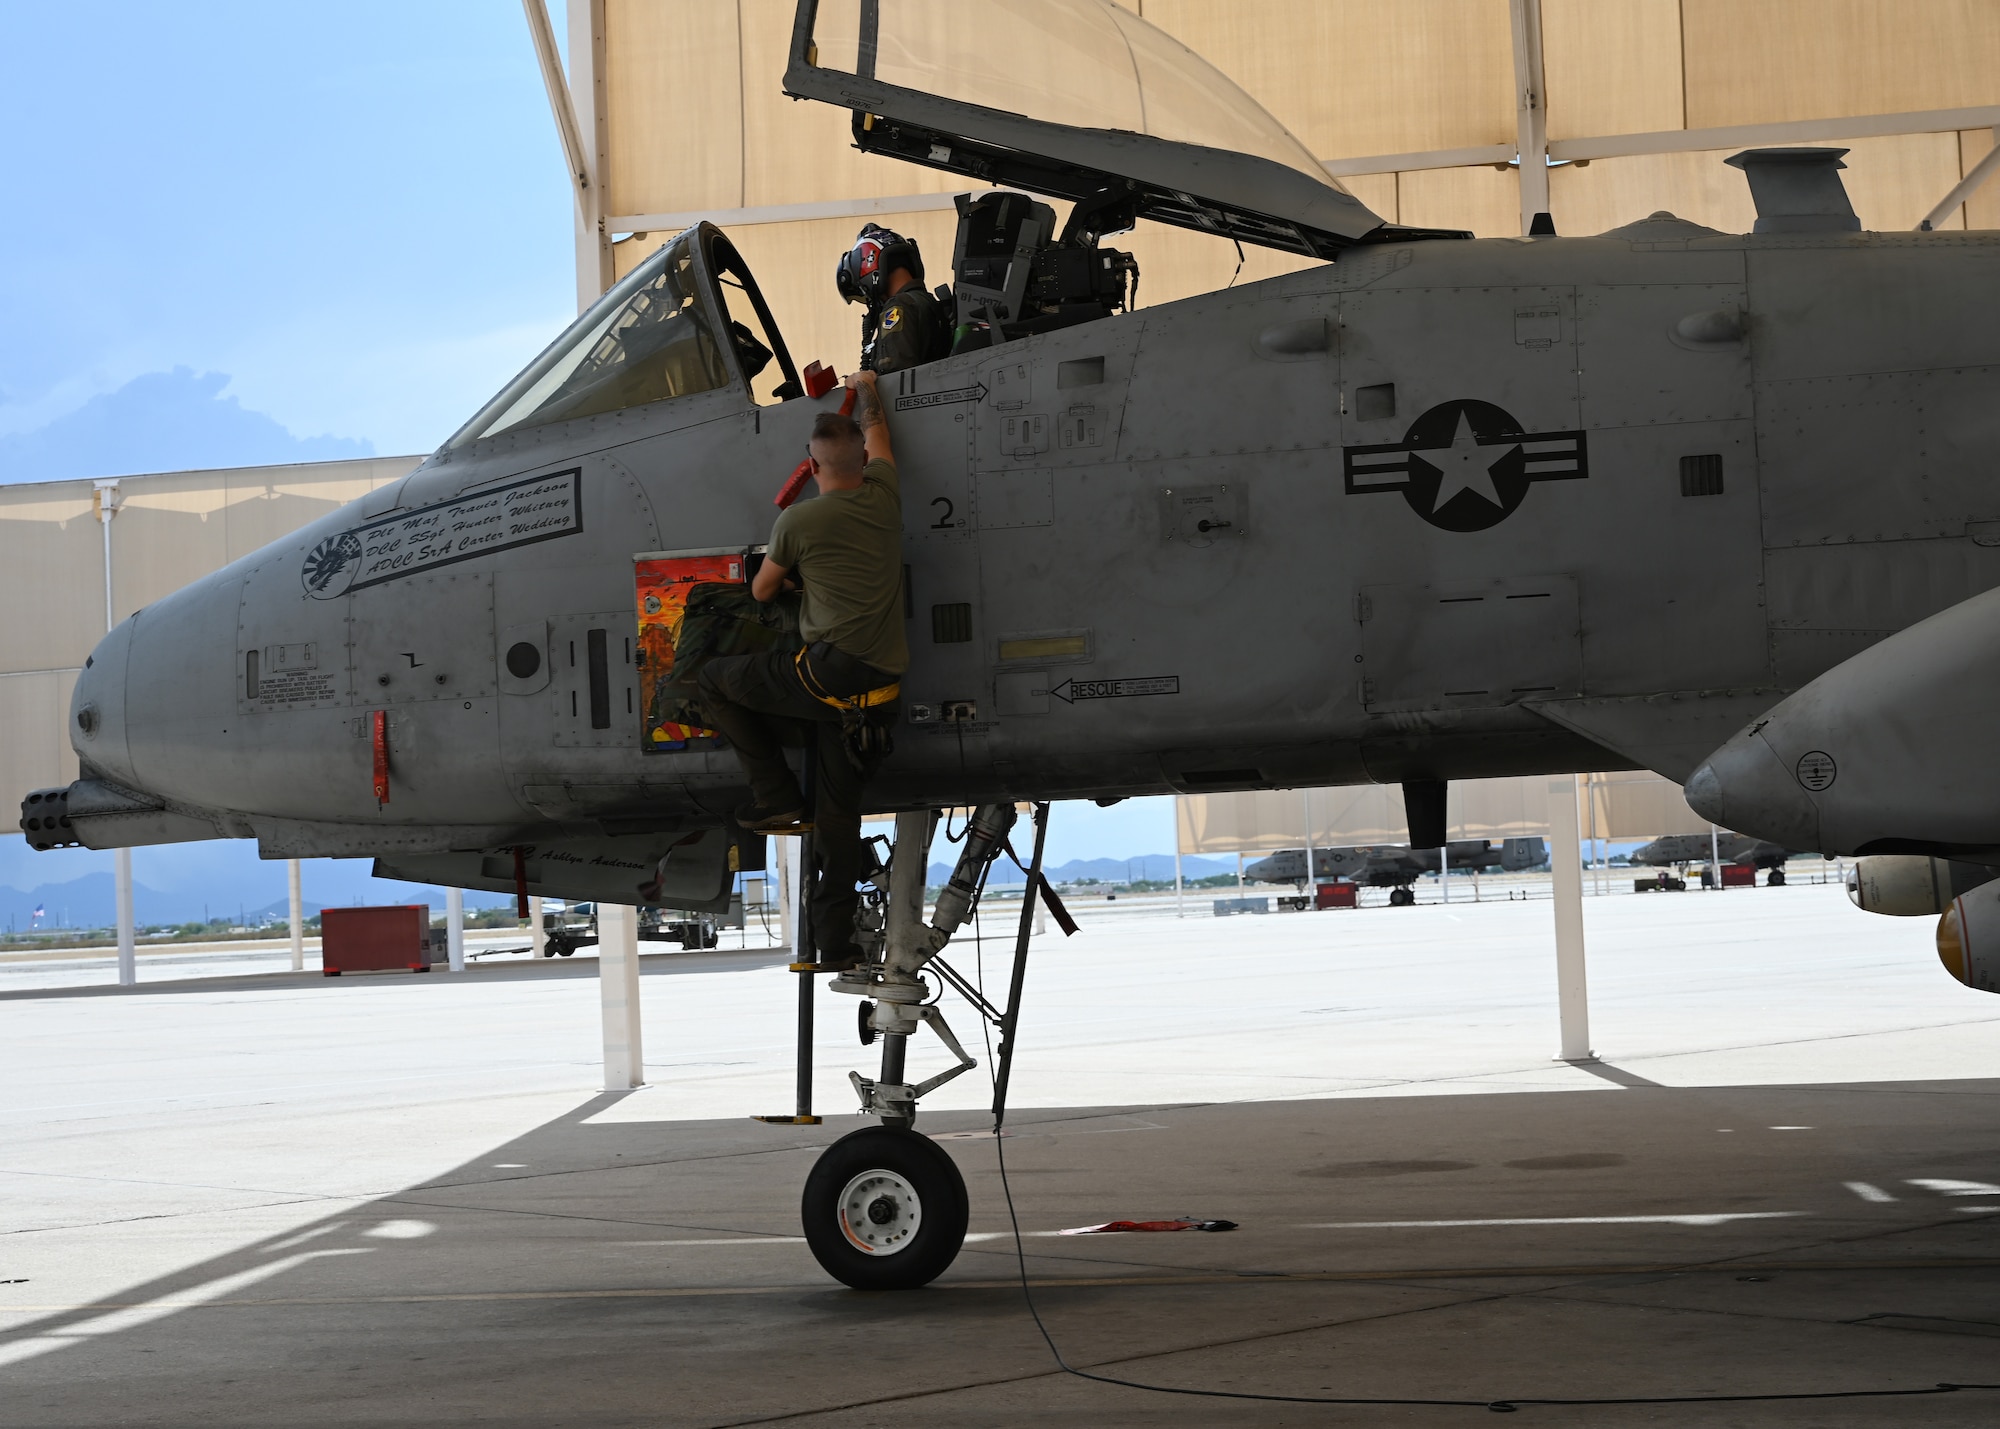 U.S. Air Force Senior Airman Thomas Snyder, 357th Fighter Generation Squadron crew chief, performs a post flight check on an A-10C Thunderbolt II aircraft at Davis-Monthan Air Force Base, Ariz. July 17, 2023. Snyder has been a crew chief at DM for three years. (U.S. Air Force photo by Staff Sgt. Abbey Rieves)